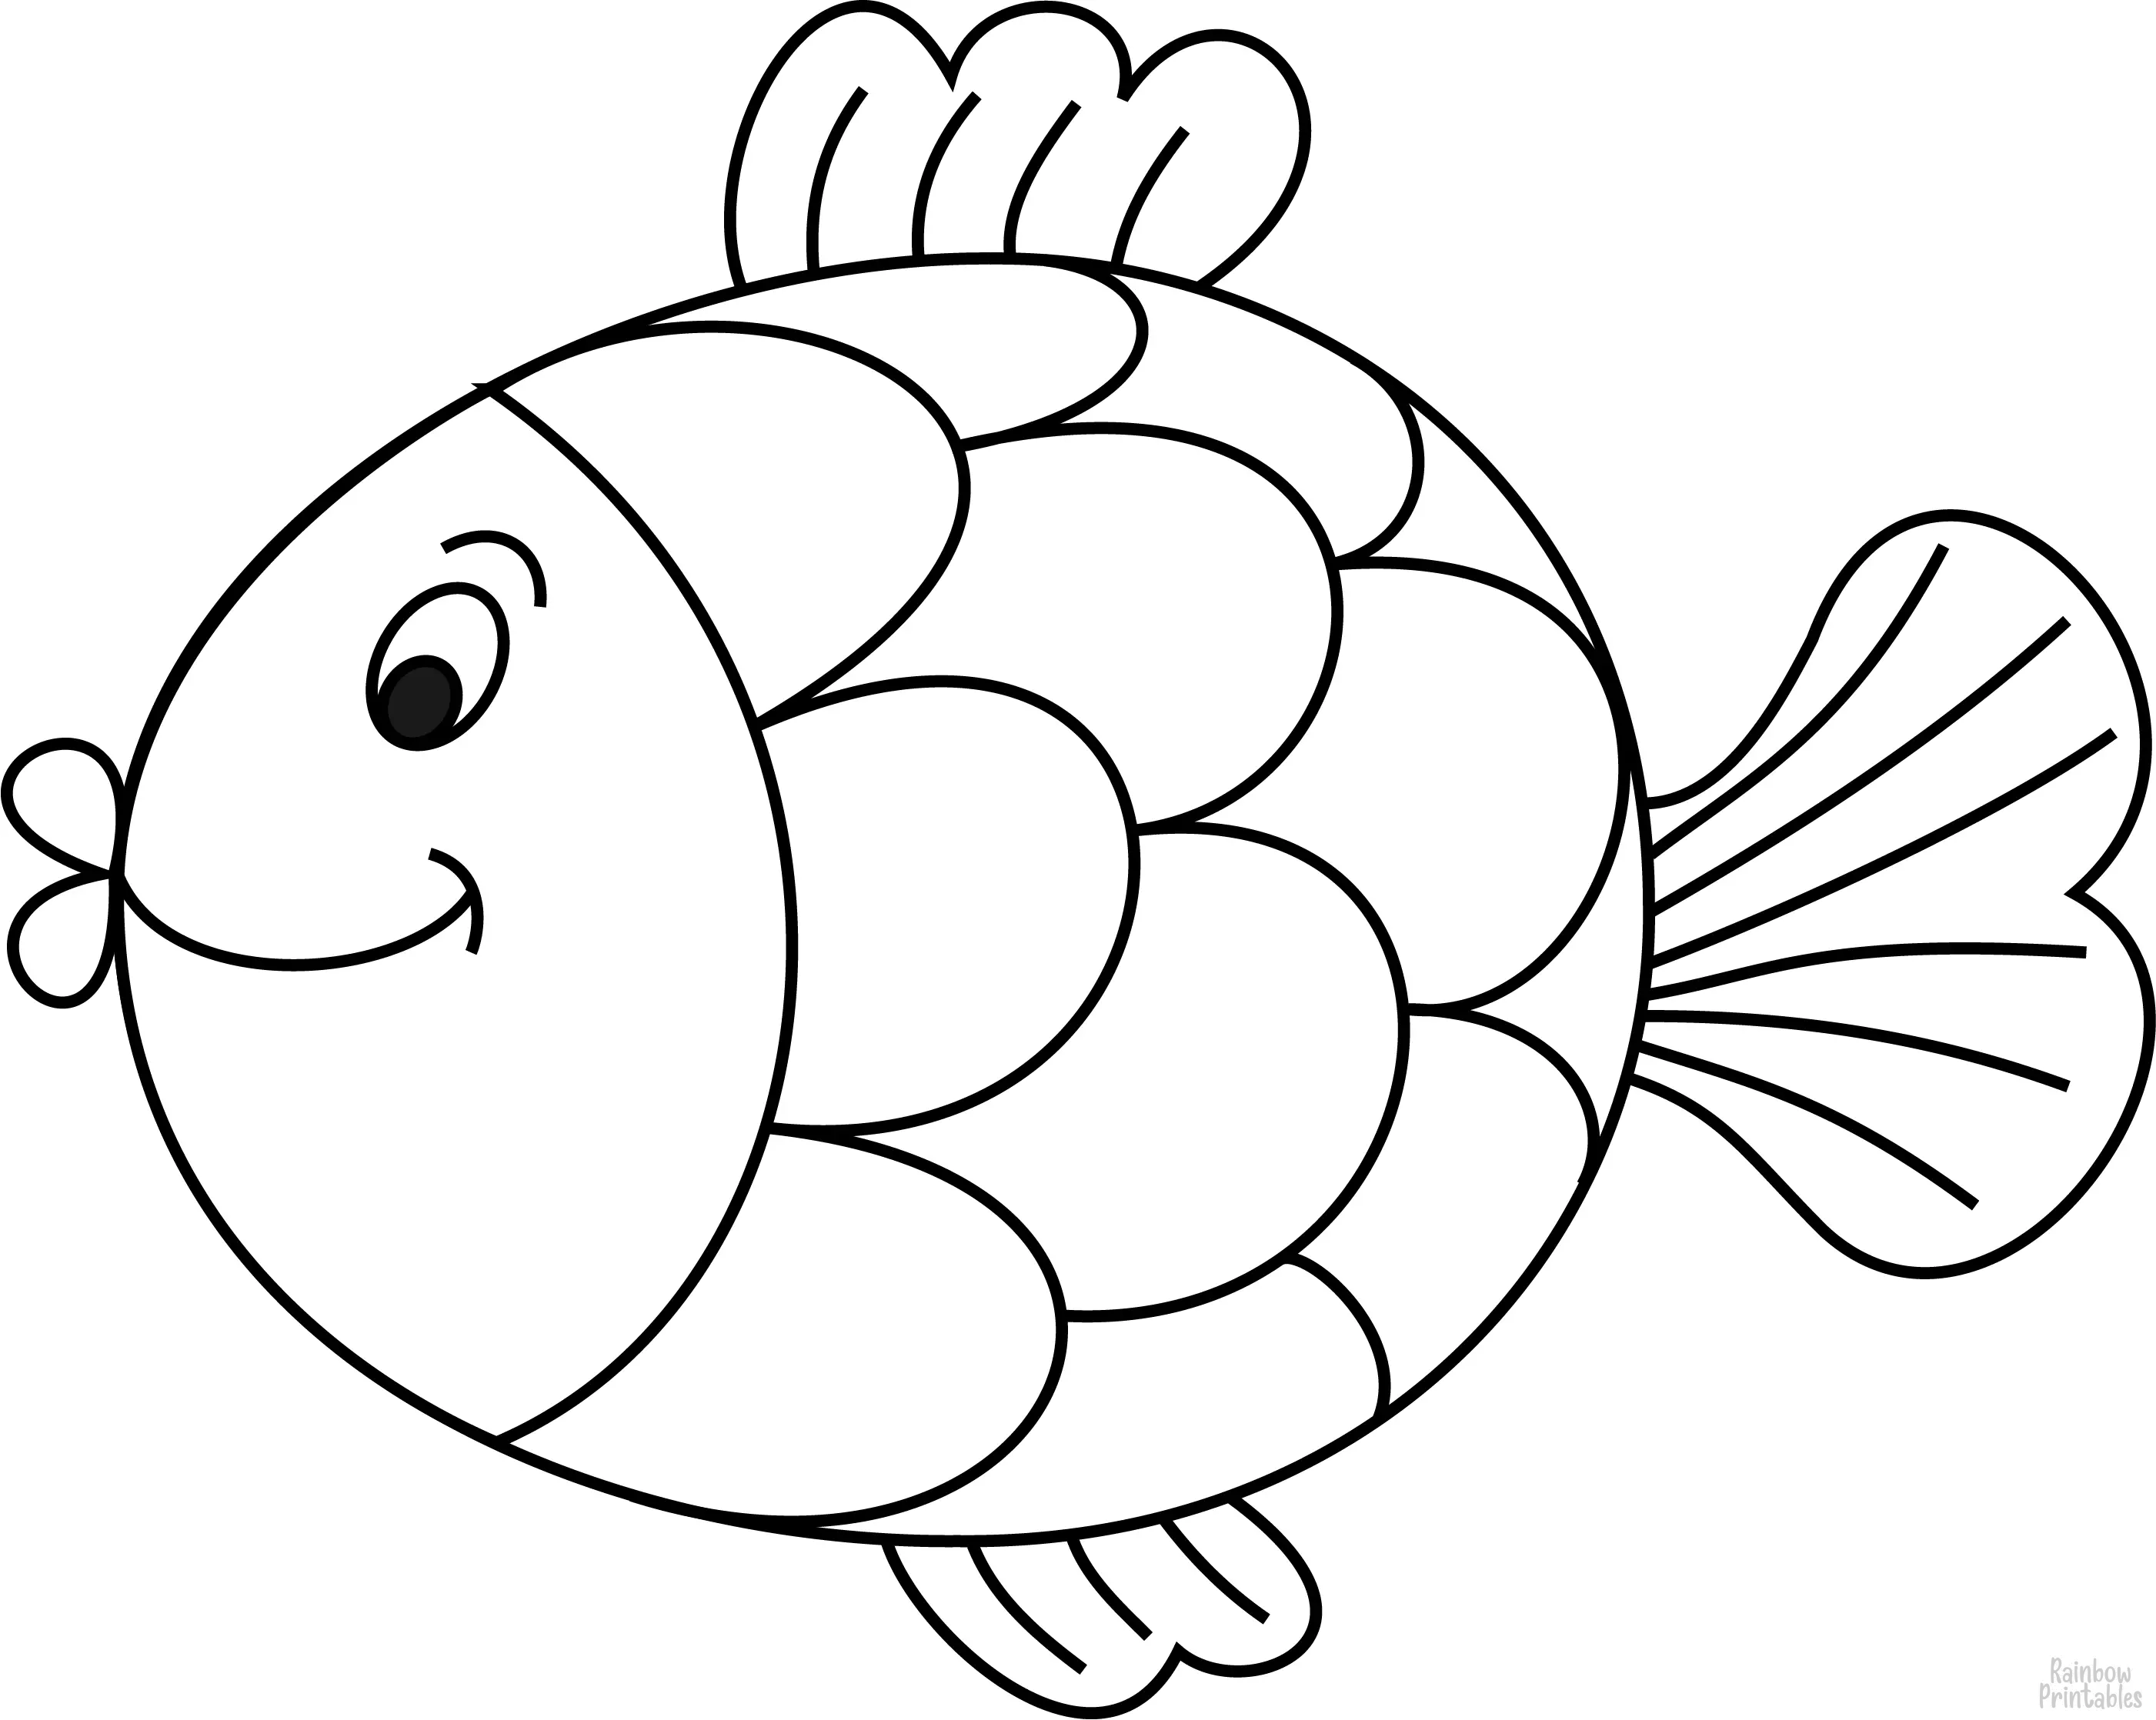 SIMPLE-EASY-line-drawings-KISSING-FISH-coloring-page-for-kids